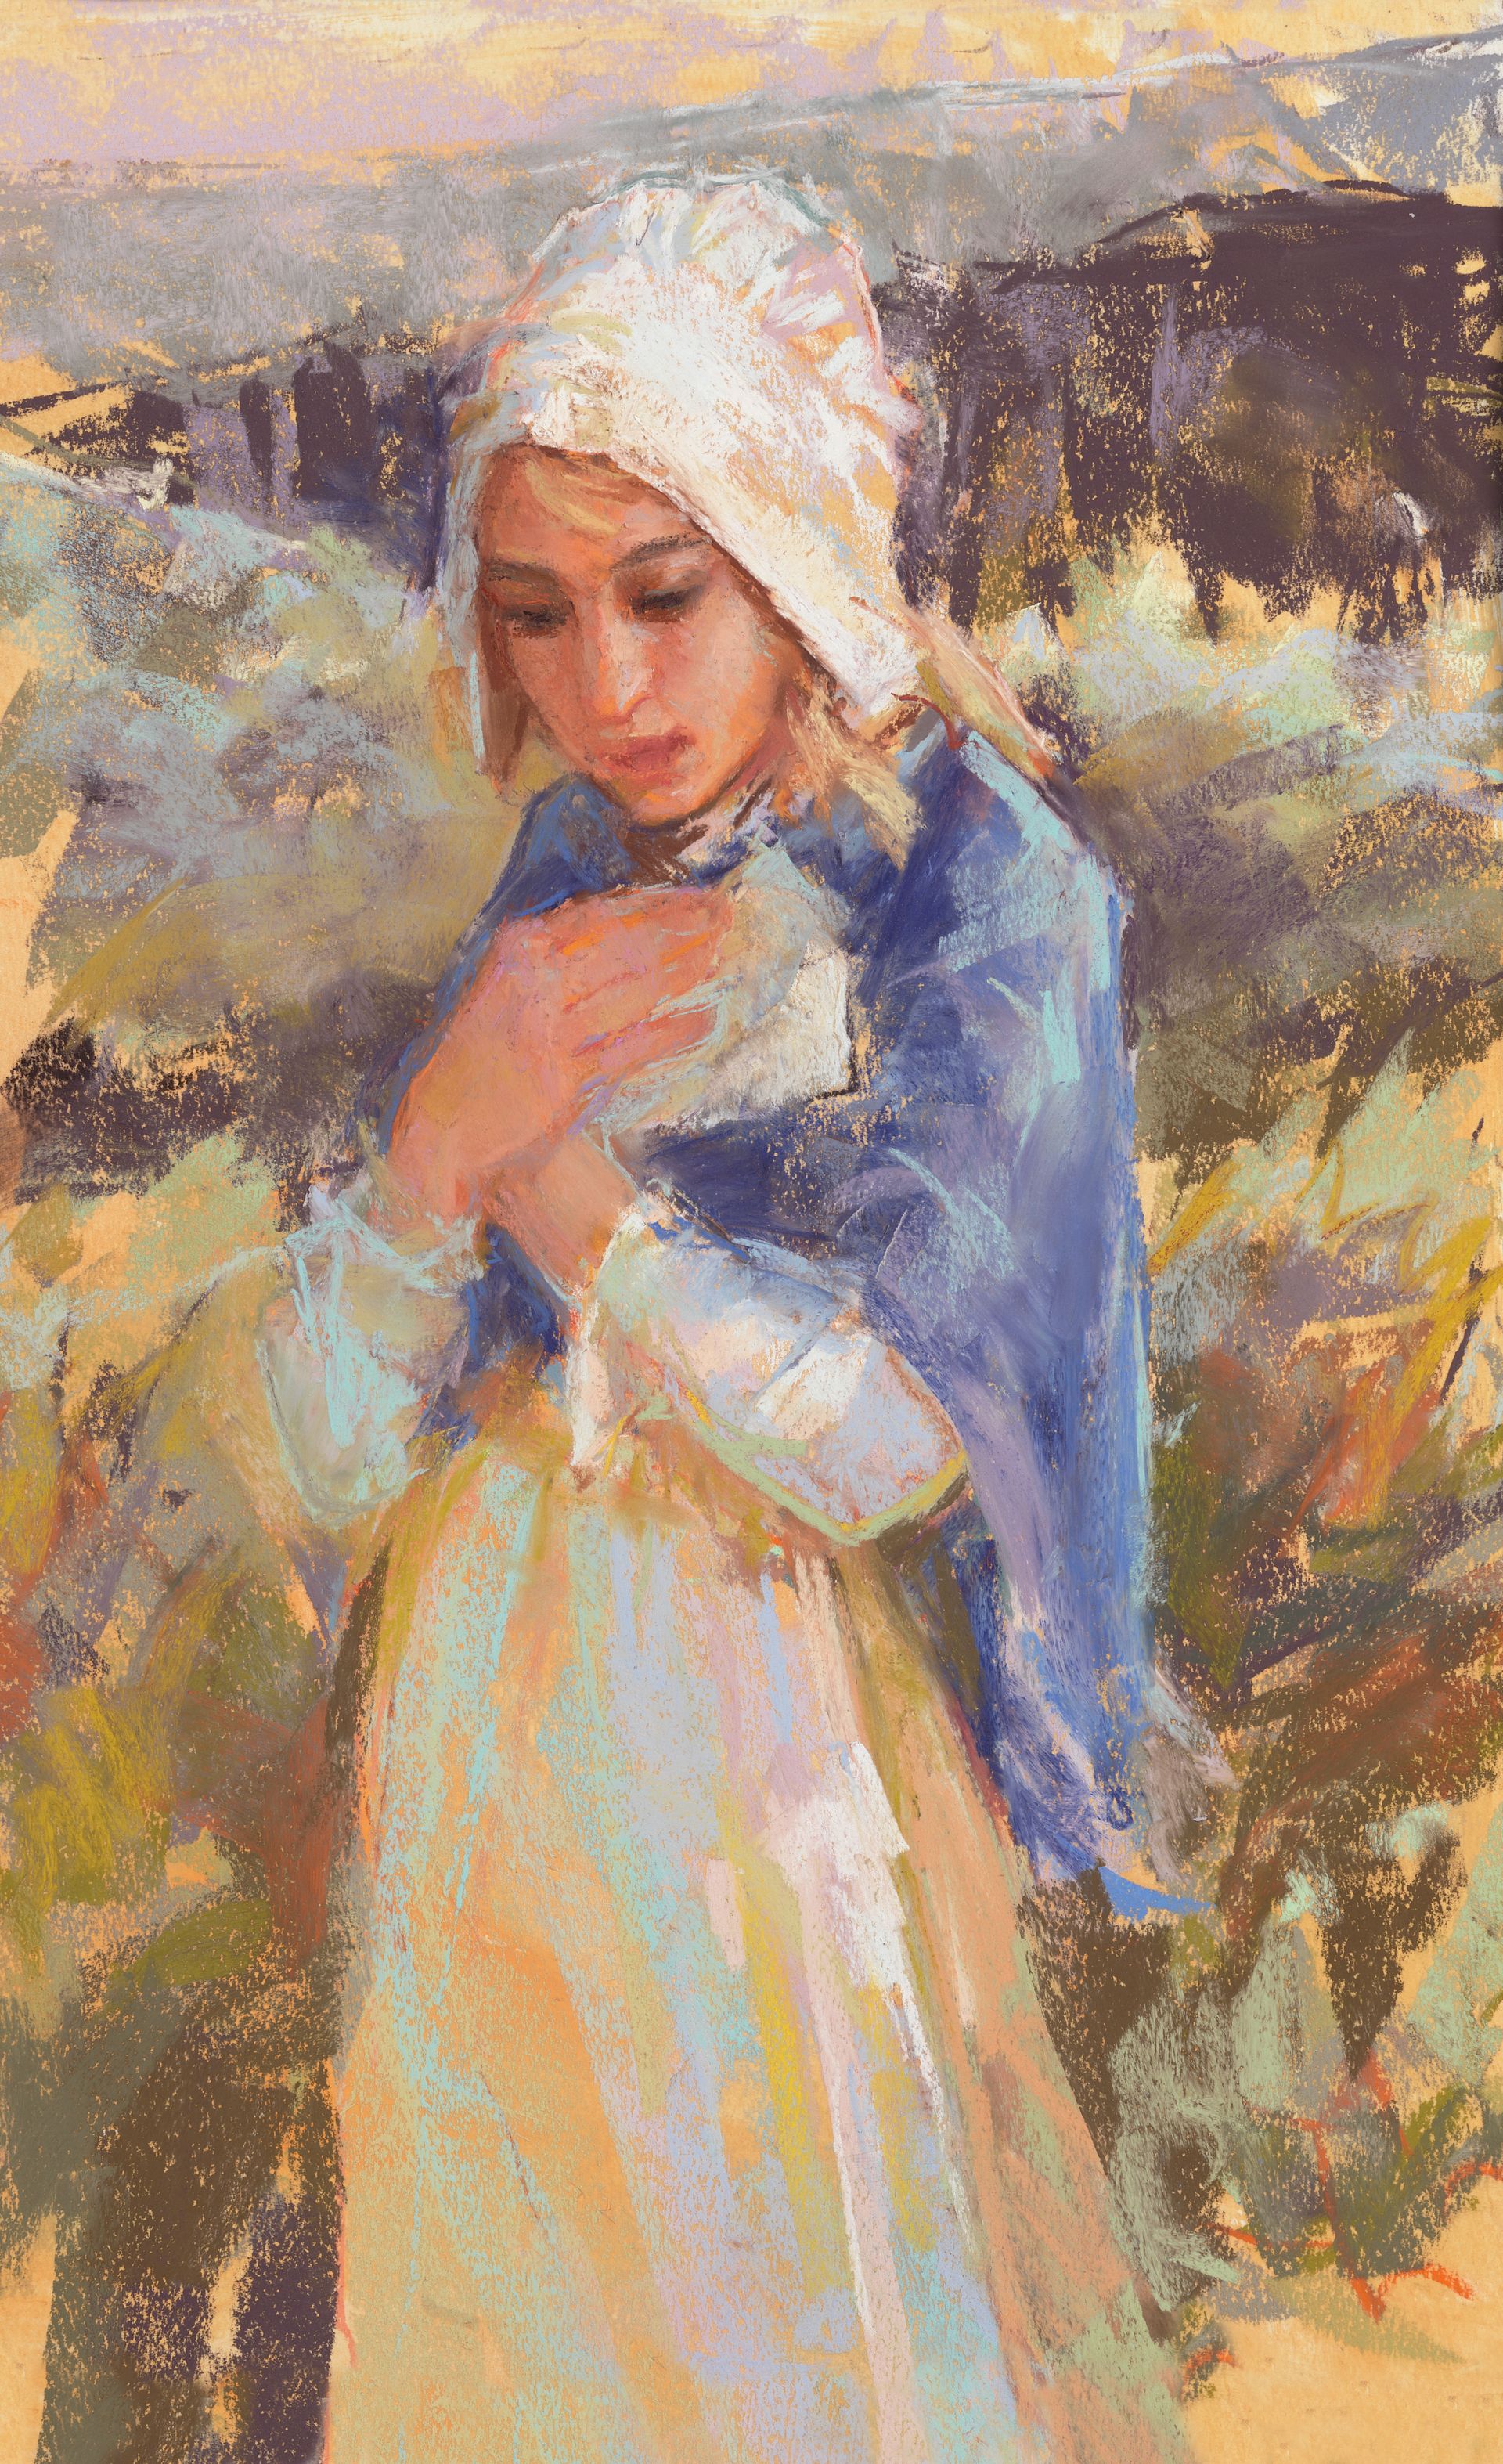 A painting of a pioneer girl by Julie Rogers.